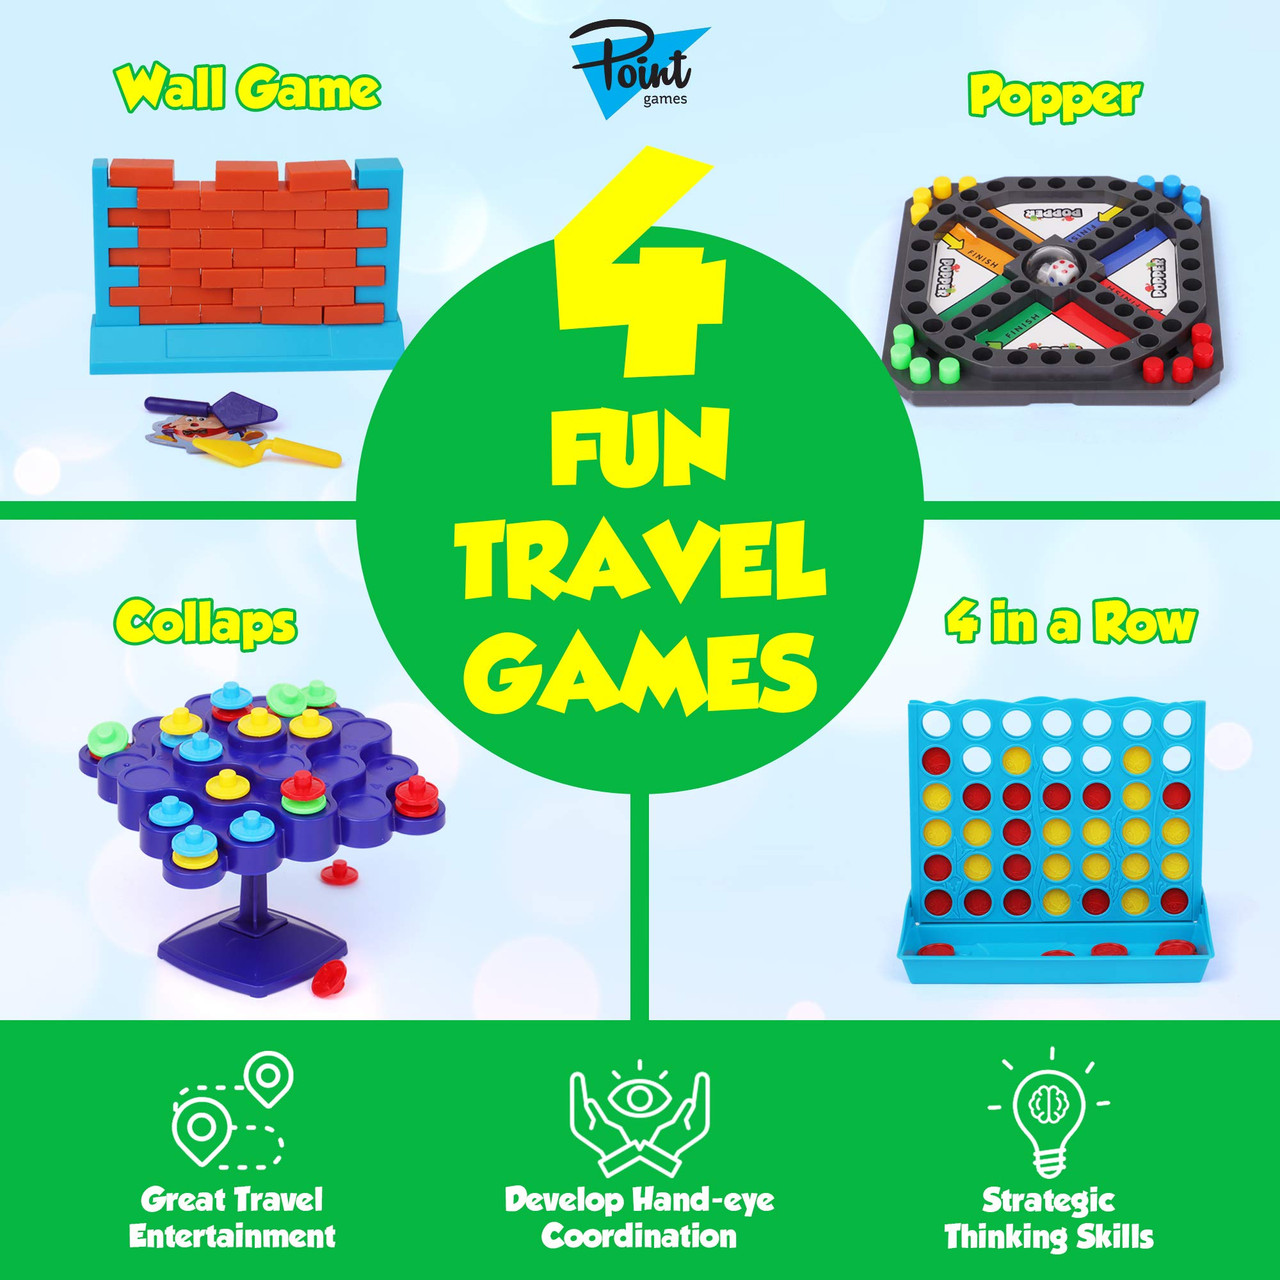 Point Games 4 Fun Travel Games - Board Game Assortment in One Box - Improves Eye-hand Coordination and Stimulates Strategy and Critical Thinking 